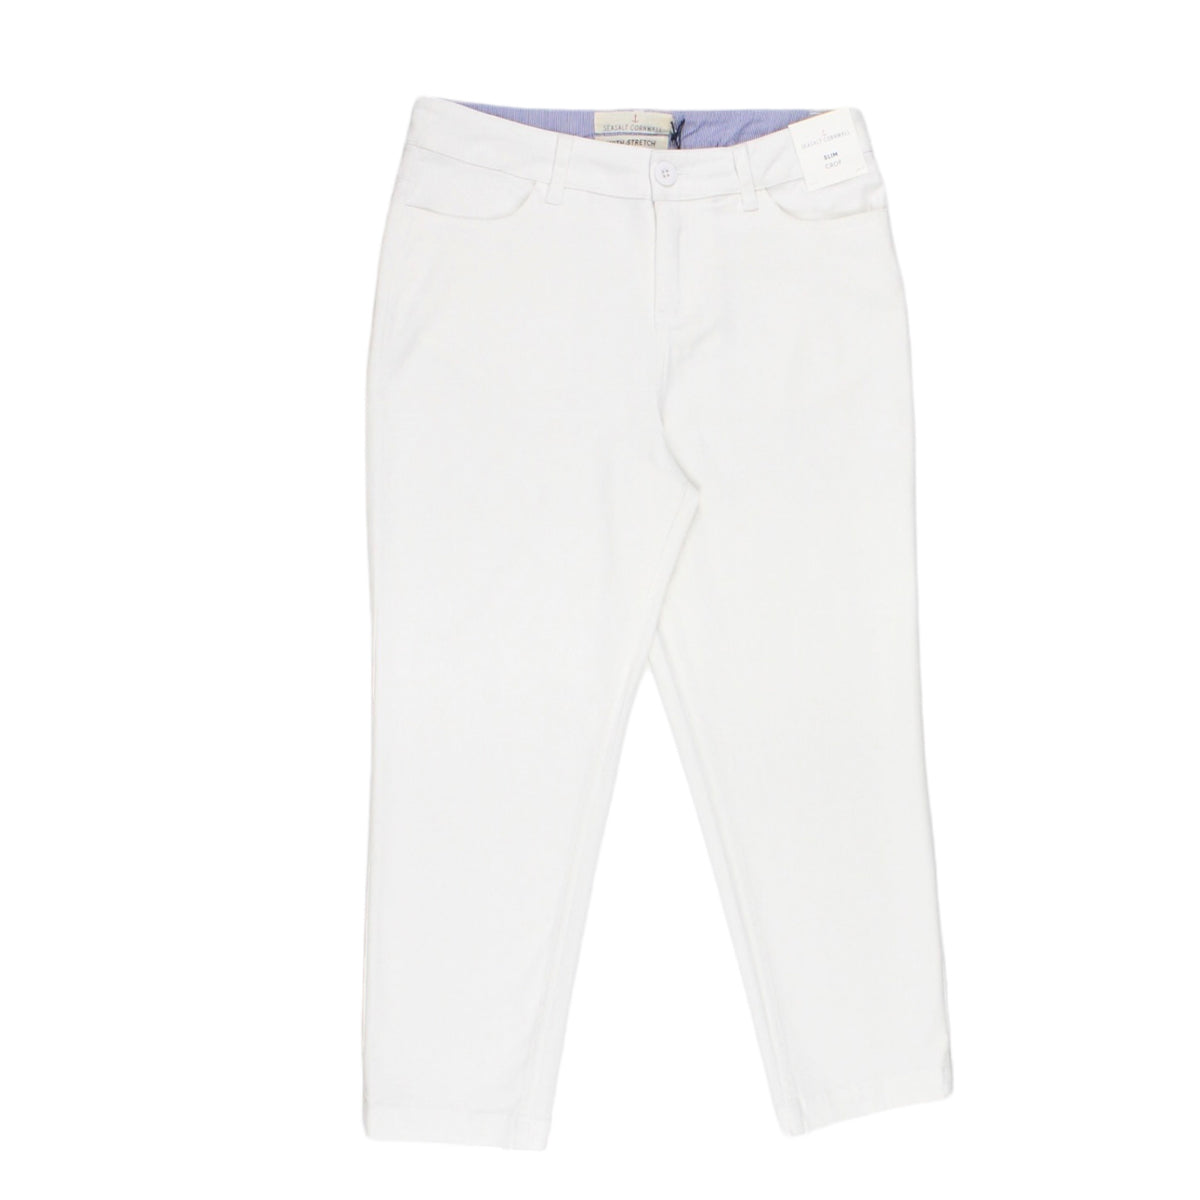 Seasalt White Cropped Jeans - Seconds